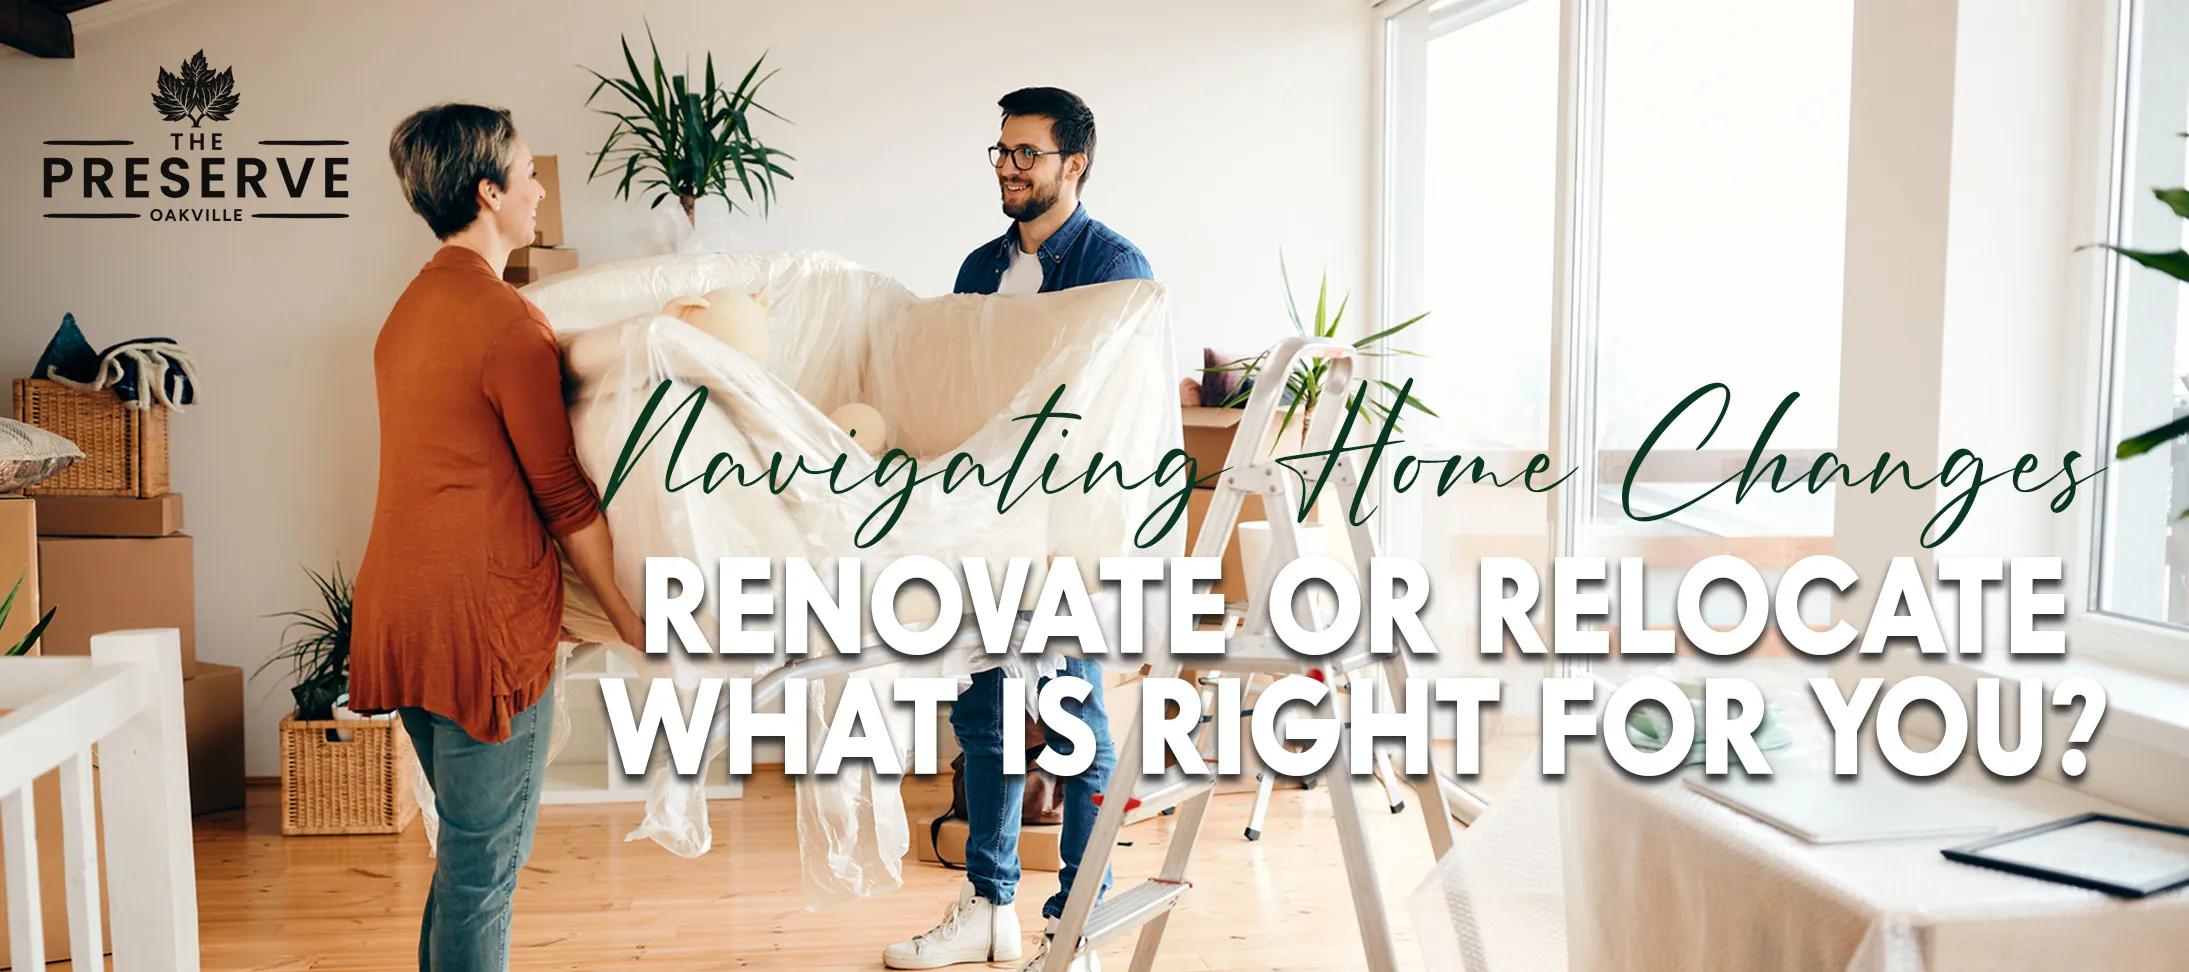 Renovate or Relocate - What's Right for You? - The Preserve Oakville